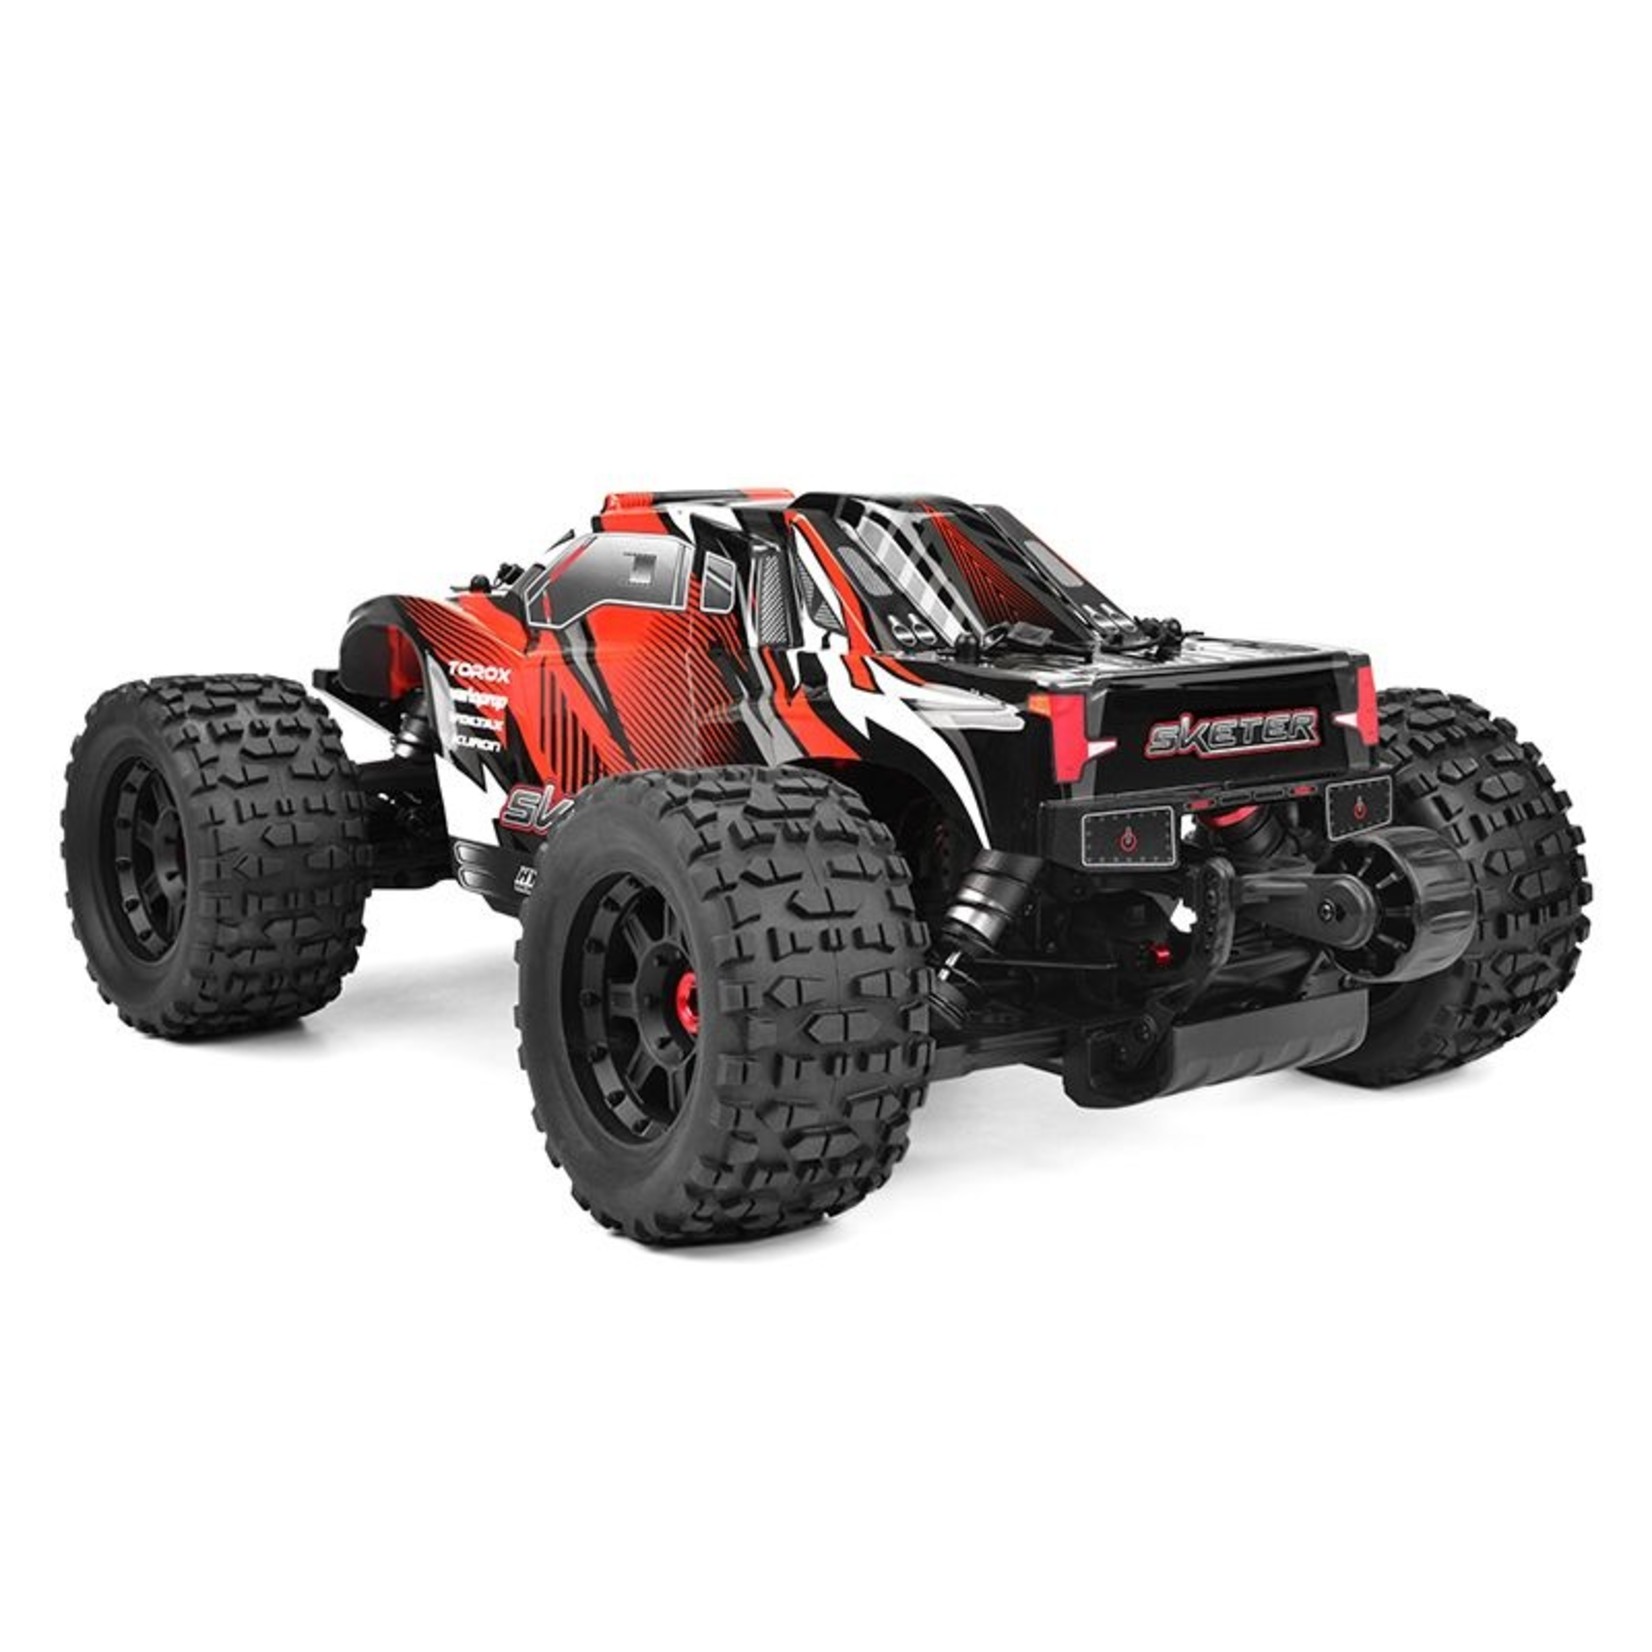 Corally (Team Corally) COR00191 Sketer XP 1/10 4WD 4S Brushless RTR Monster Truck (No Battery or Charger)